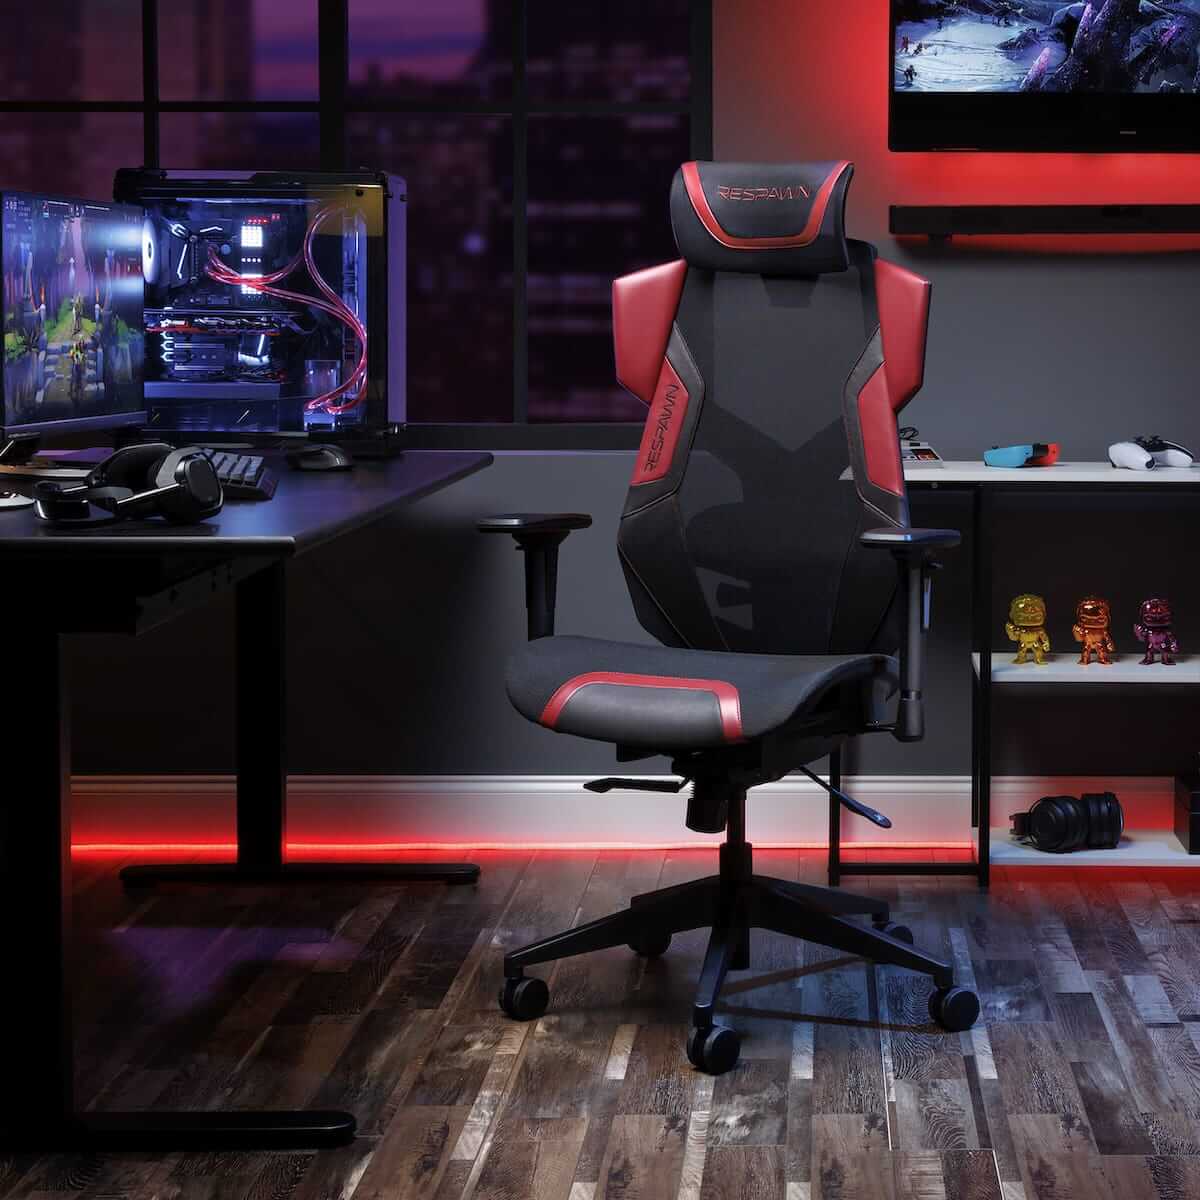 Respawn flexx red color - an amazing gaming chair with ergonomic